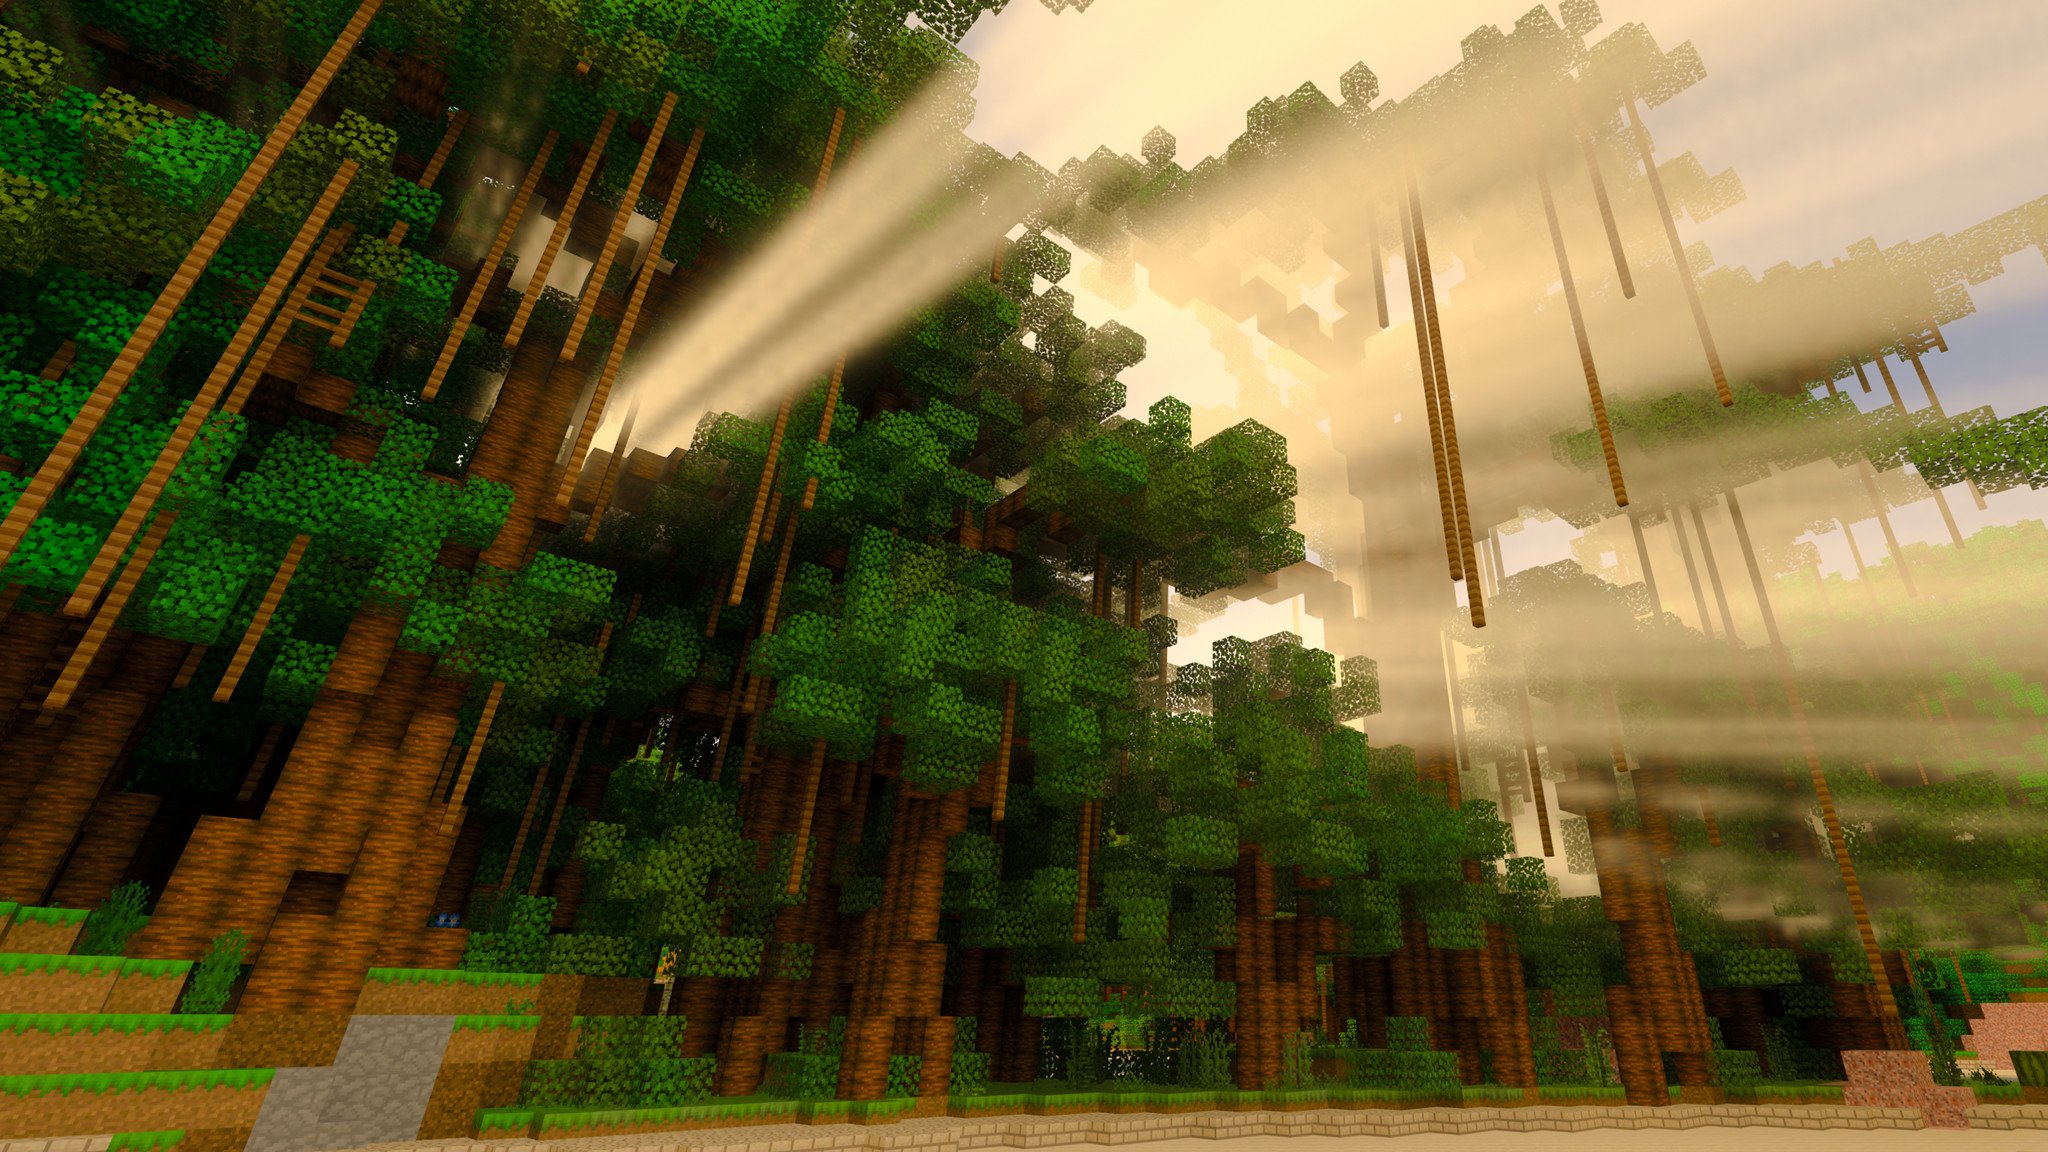 Mojang Announces Ray Tracing for Minecraft with NVIDIA RTX Cards